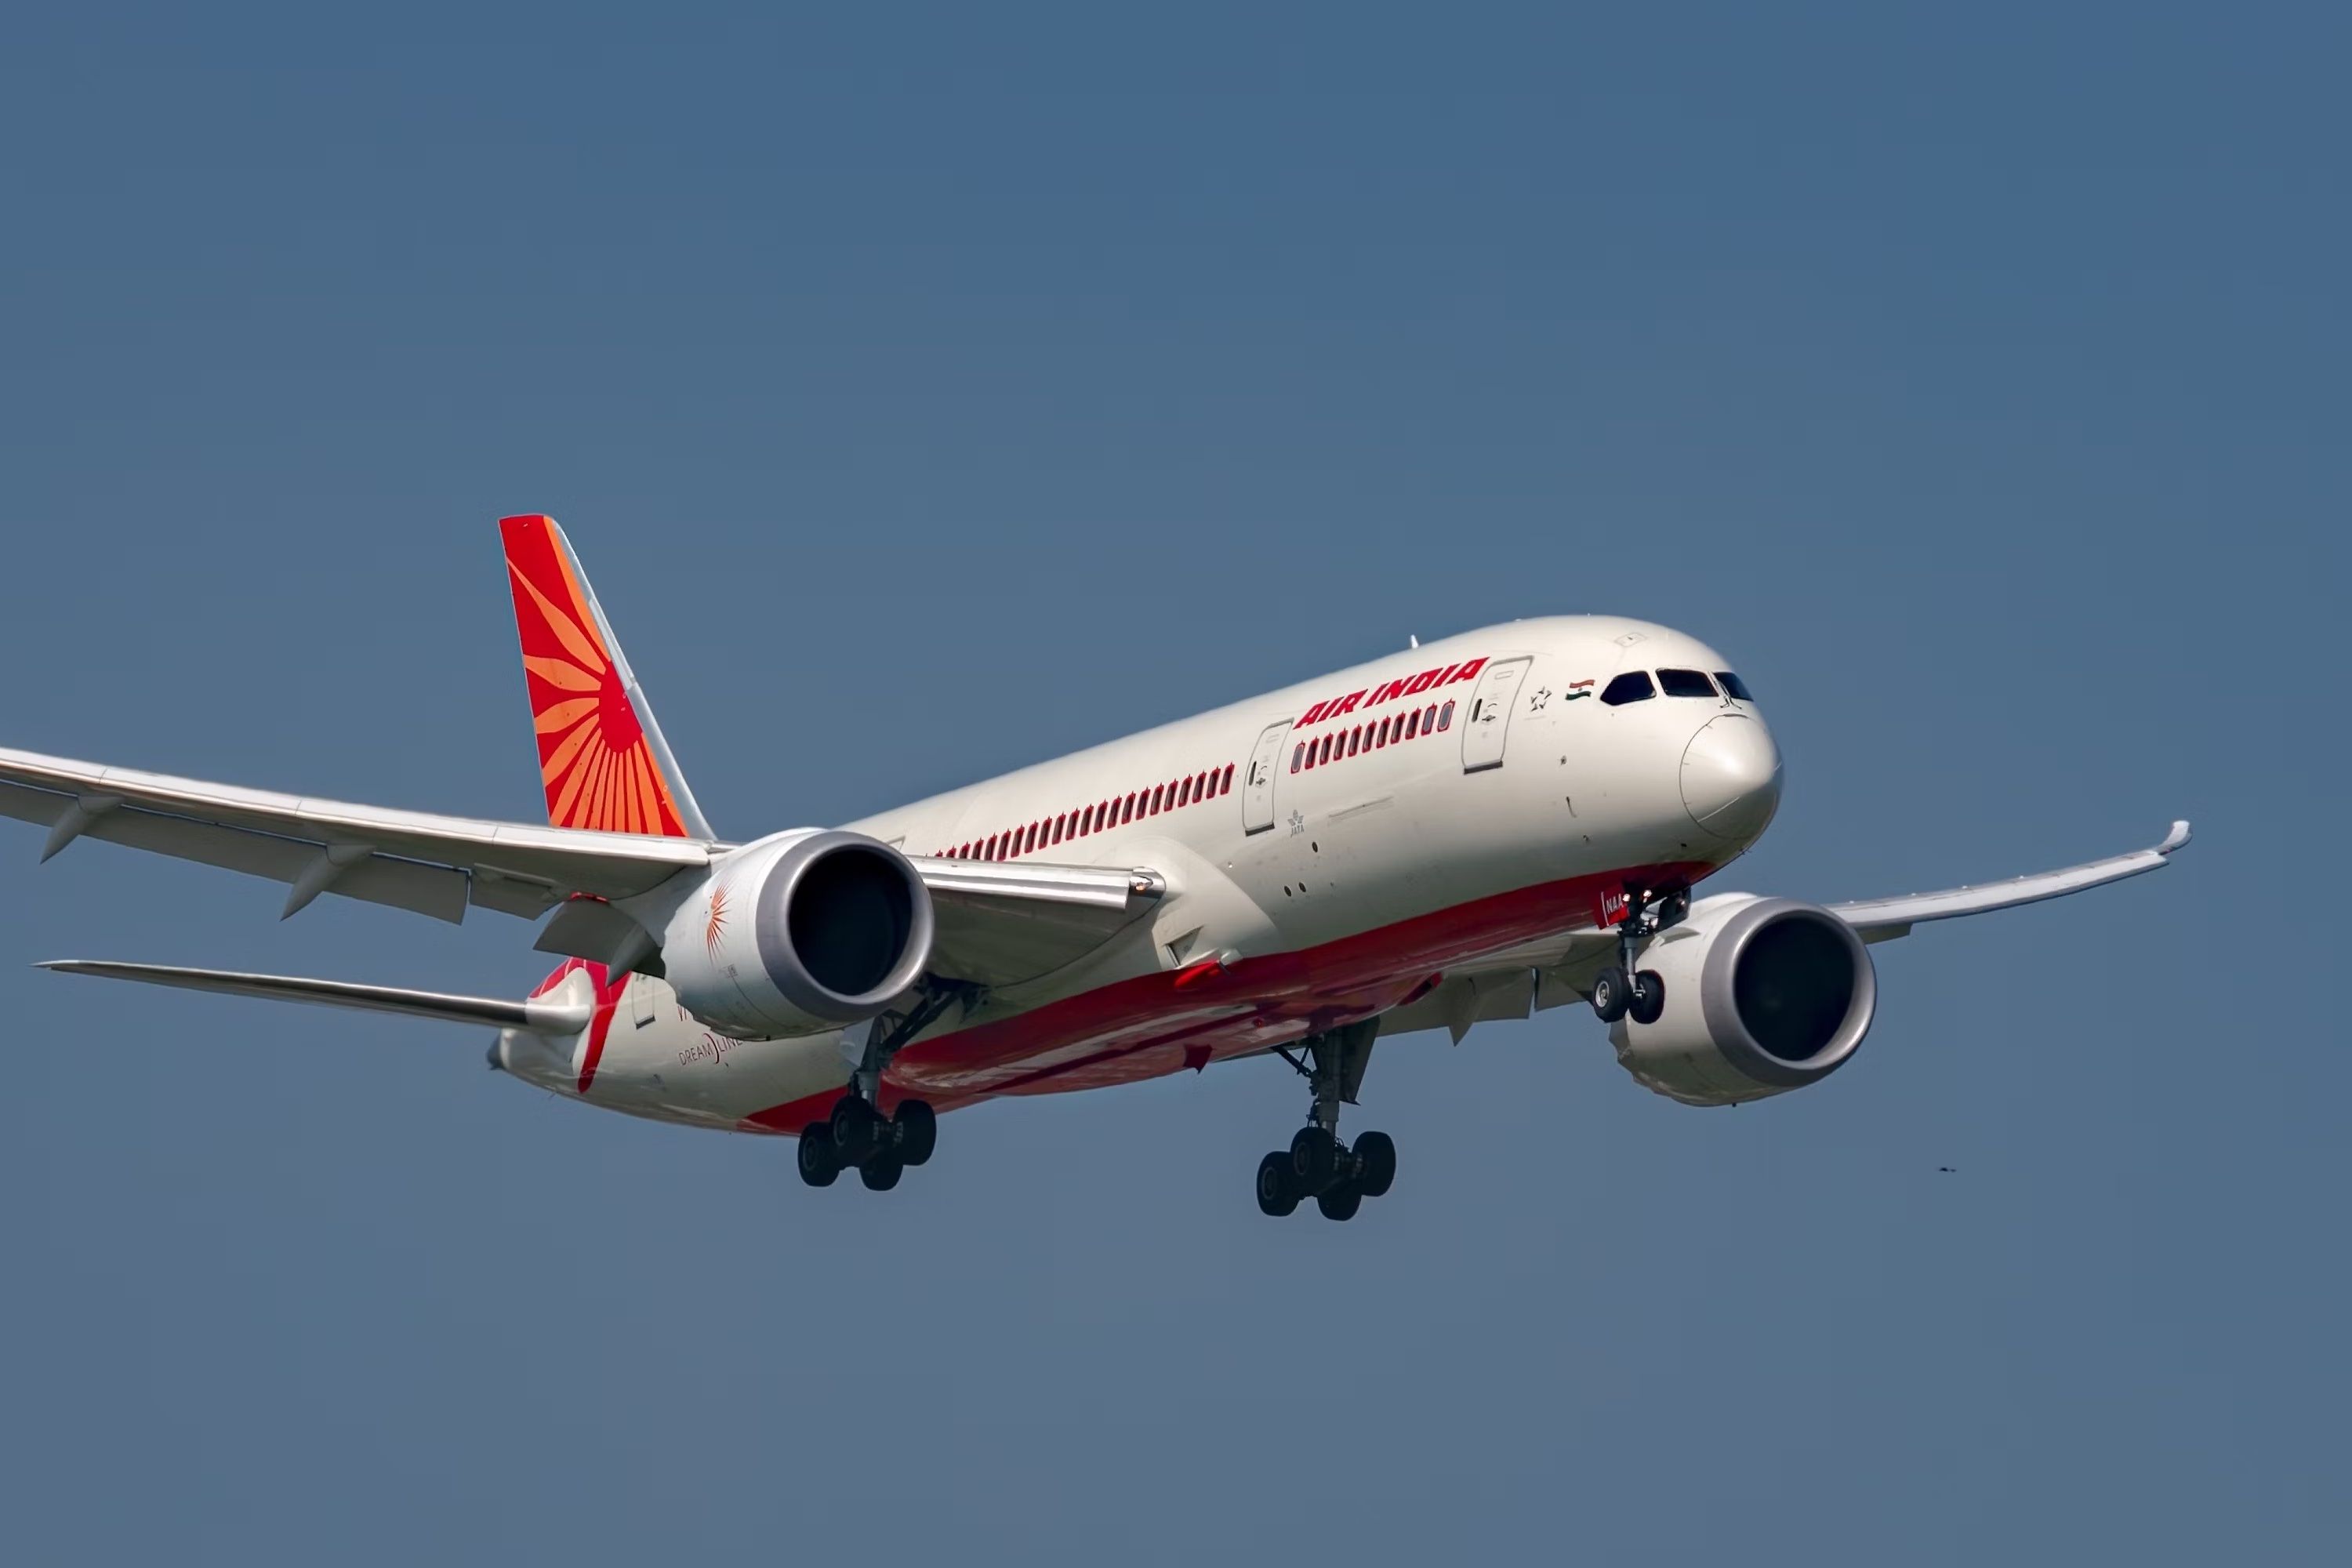 An Air India Boeing 787 flying in the sky.